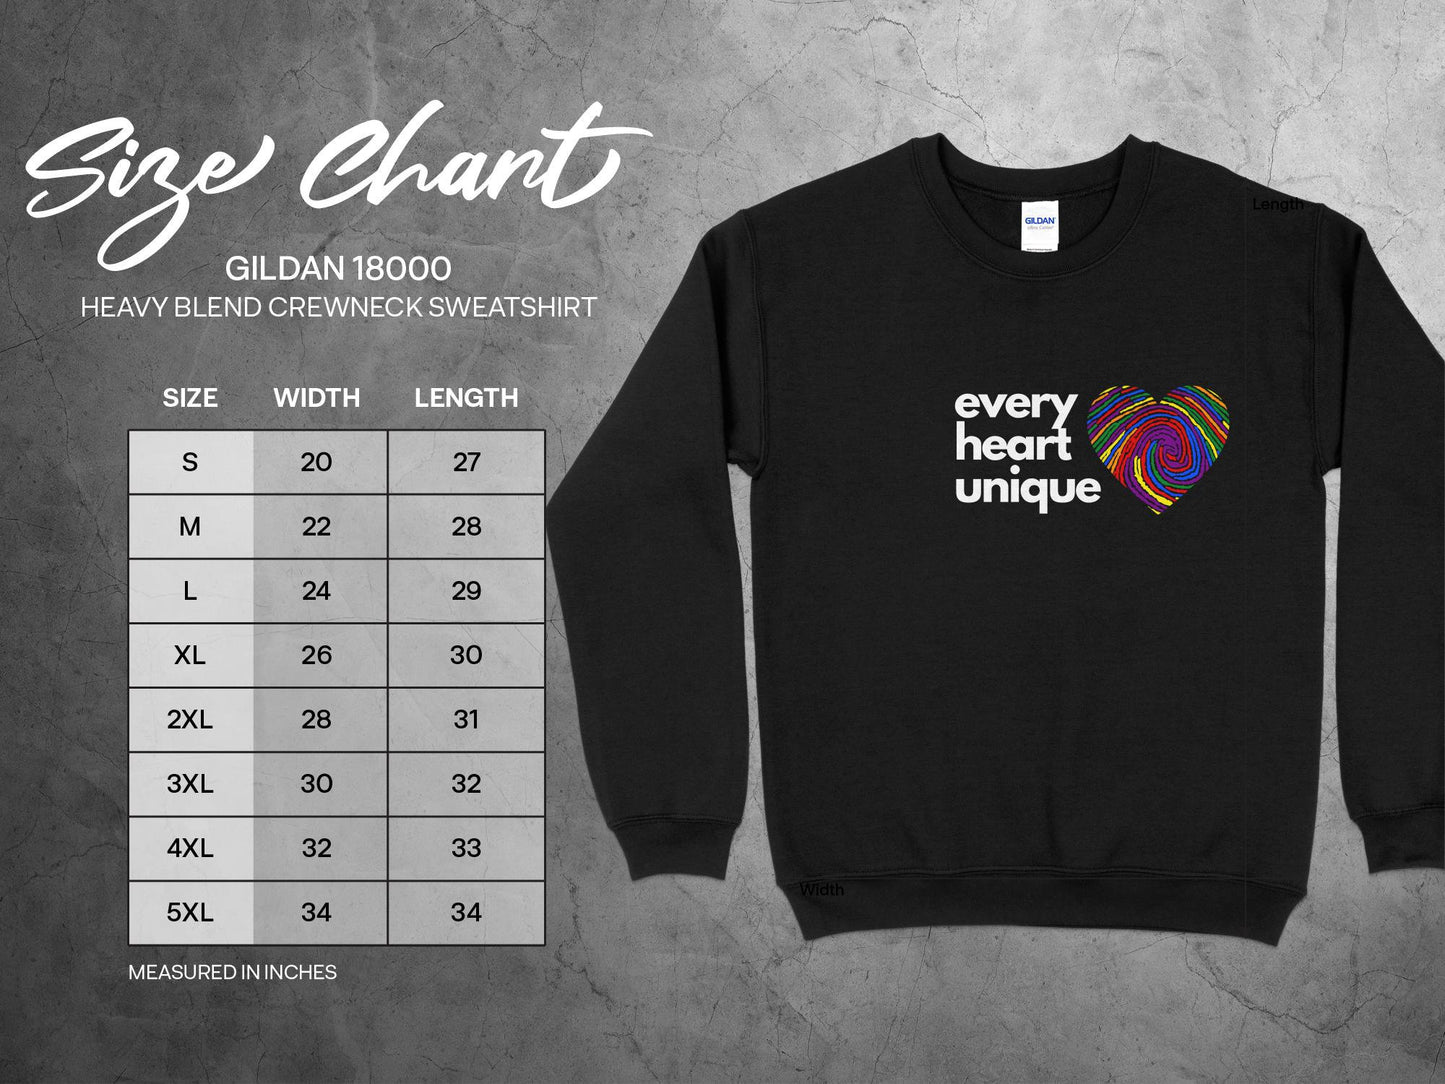 Every Heart is Unique Shirt - Love and Hope Human Tee, IVF gifts, infertility tee, infertility struggles, not every heart is broken tee